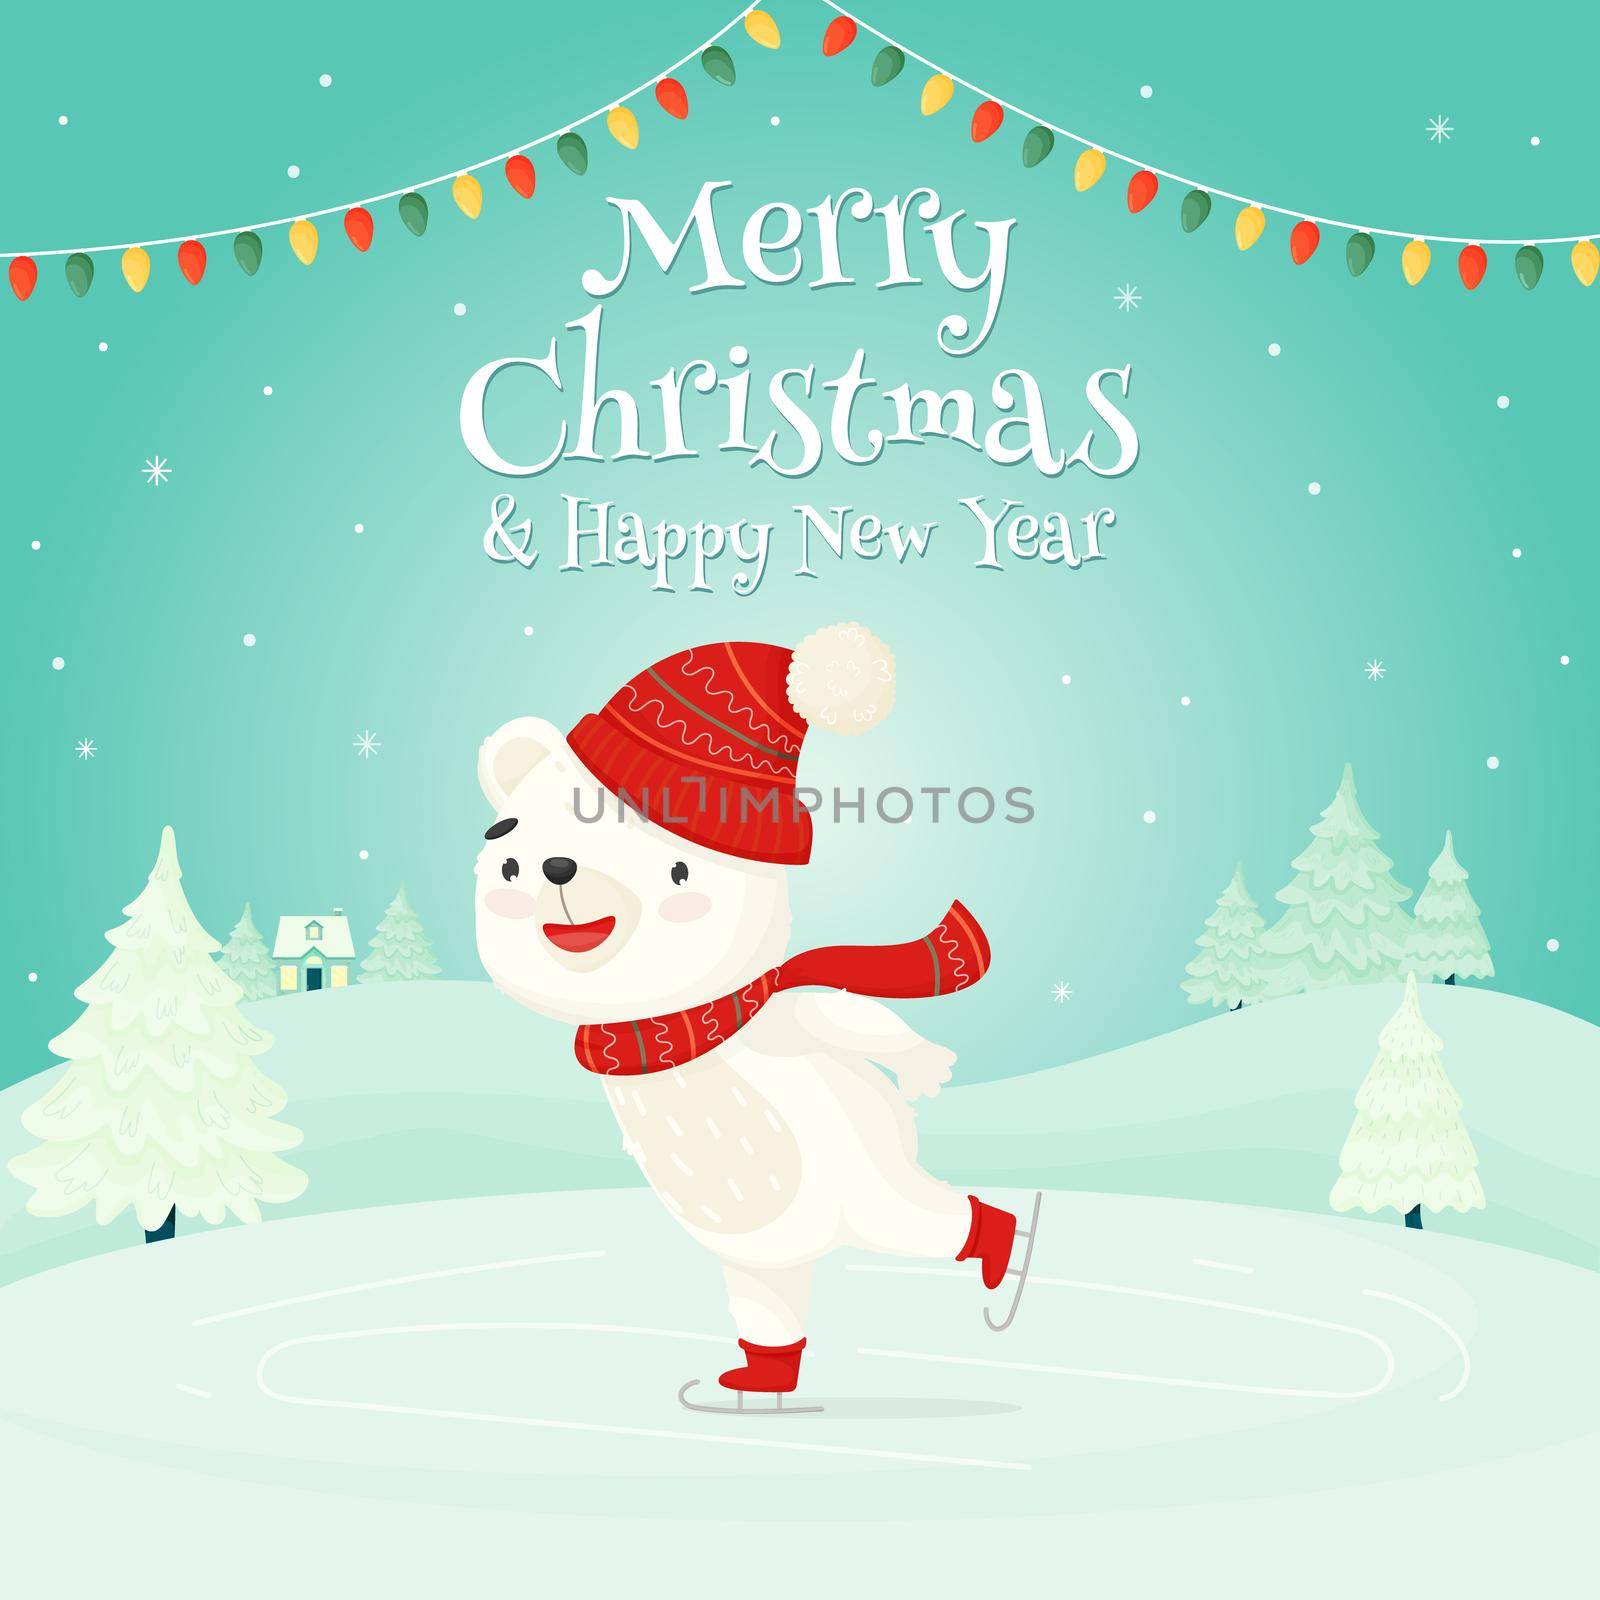 Merry christmas and a happy new year. Cute white bear ice skating on a background of a winter landscape. by Lena_Khmelniuk